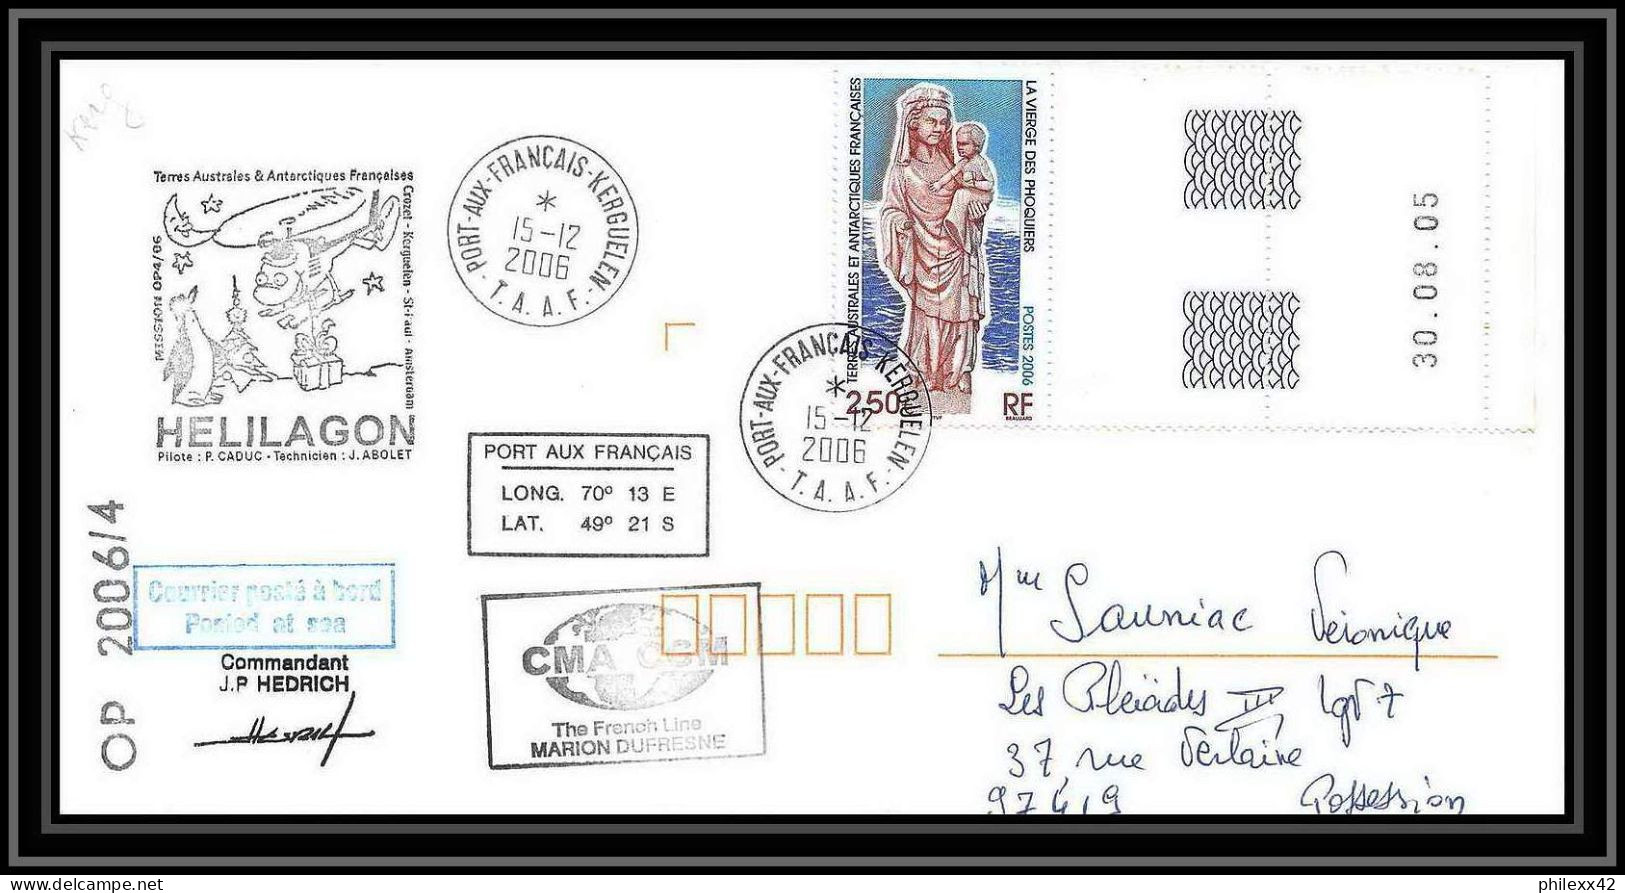 2629 ANTARCTIC Terres Australes TAAF Lettre Cover Dufresne 2 Signé Signed Op 2006/4 KERGUELEN Coin Daté N°443 Helilagon - Helicopters